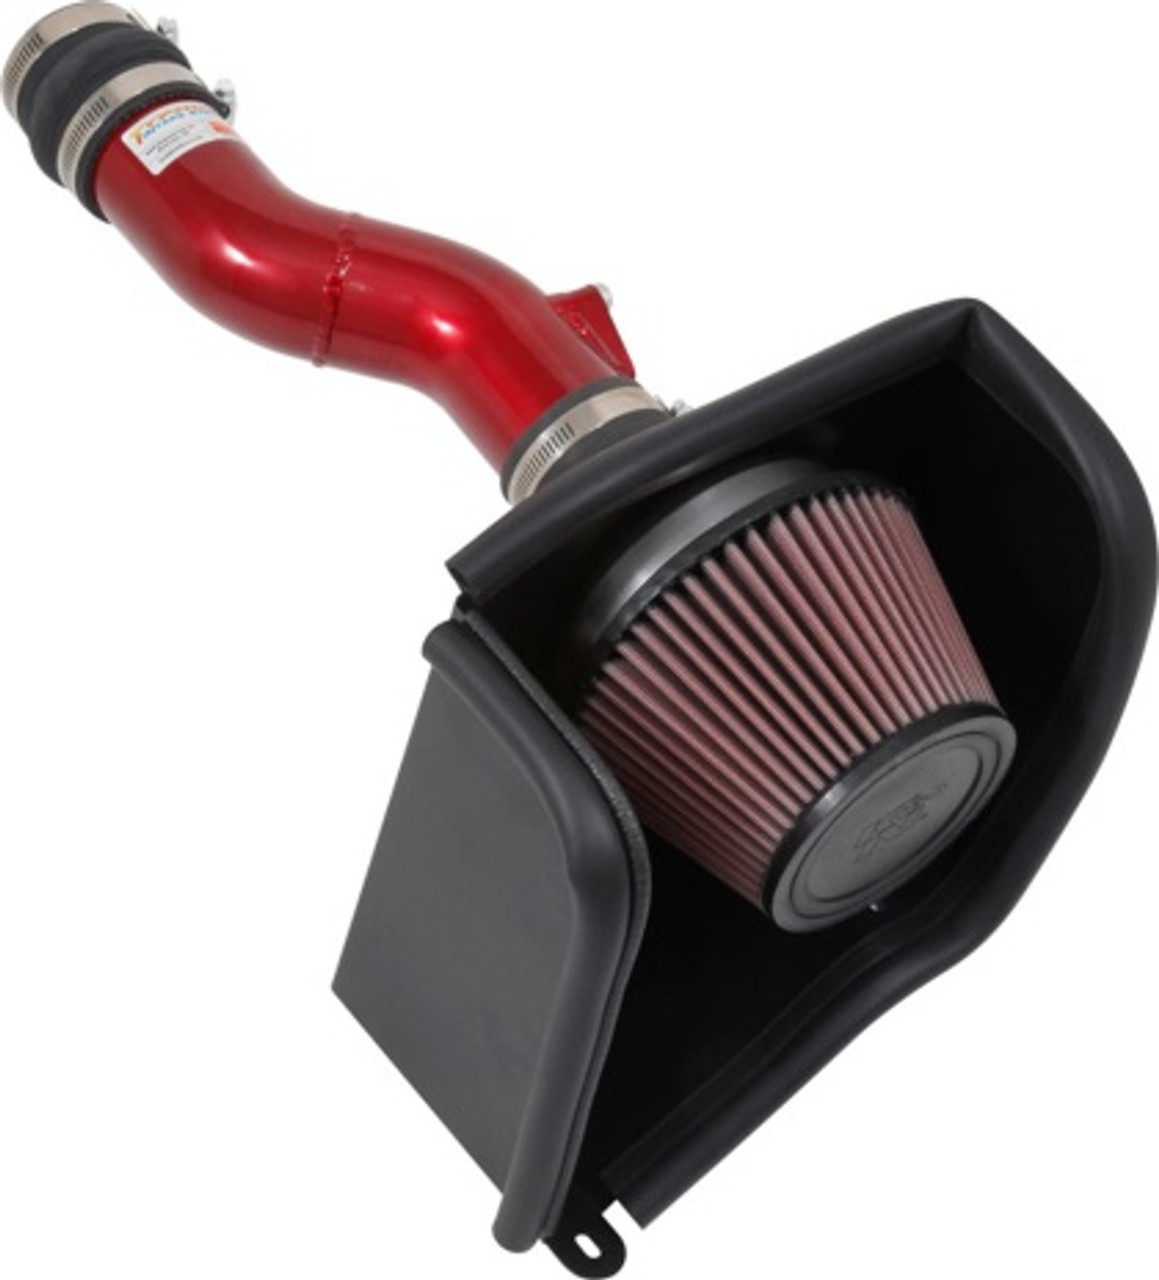 Performance Air Intake System
Intake Pipe Color / Finish: Candy Red Powder Coating